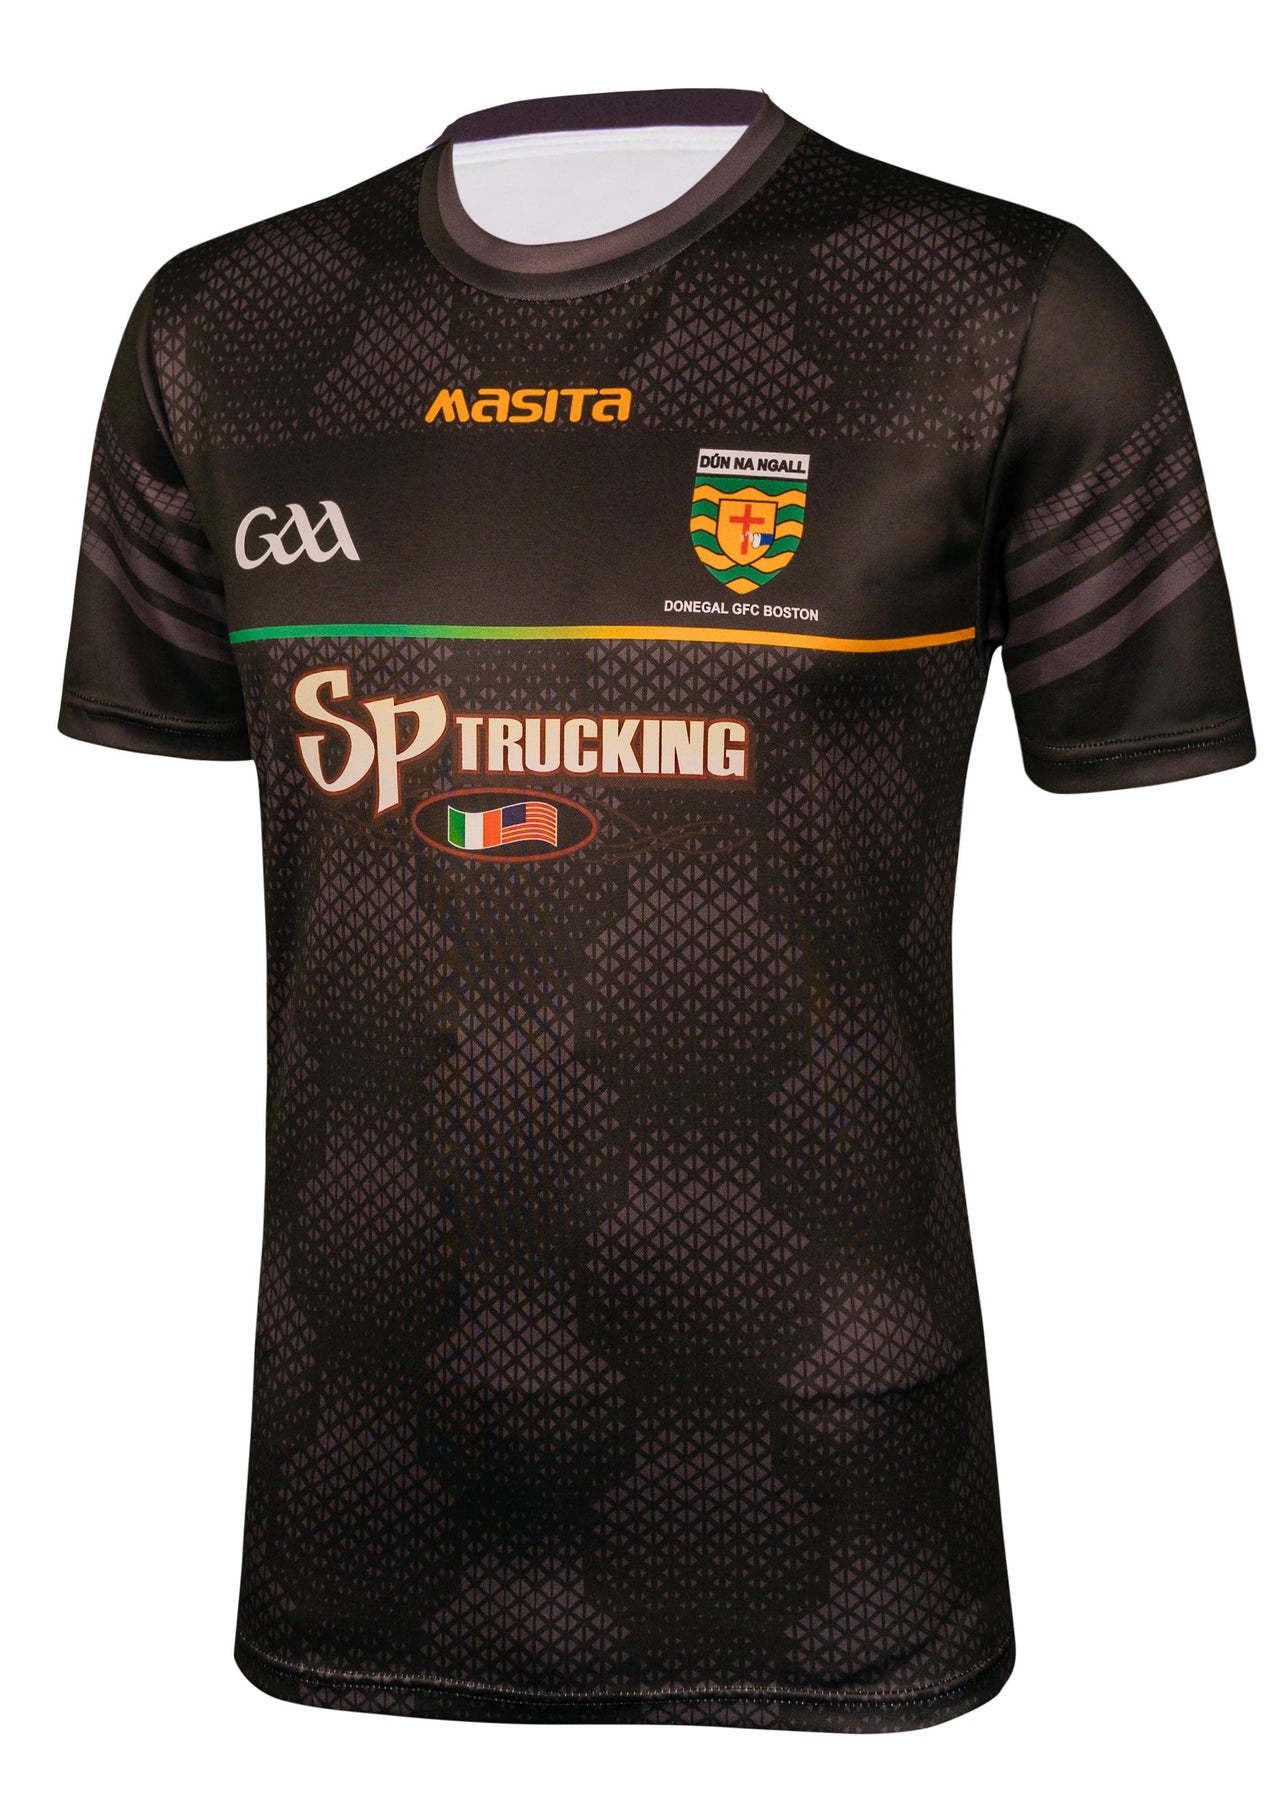 Donegal Boston Senior Team Goalkeeper Jersey Player Fit Adult